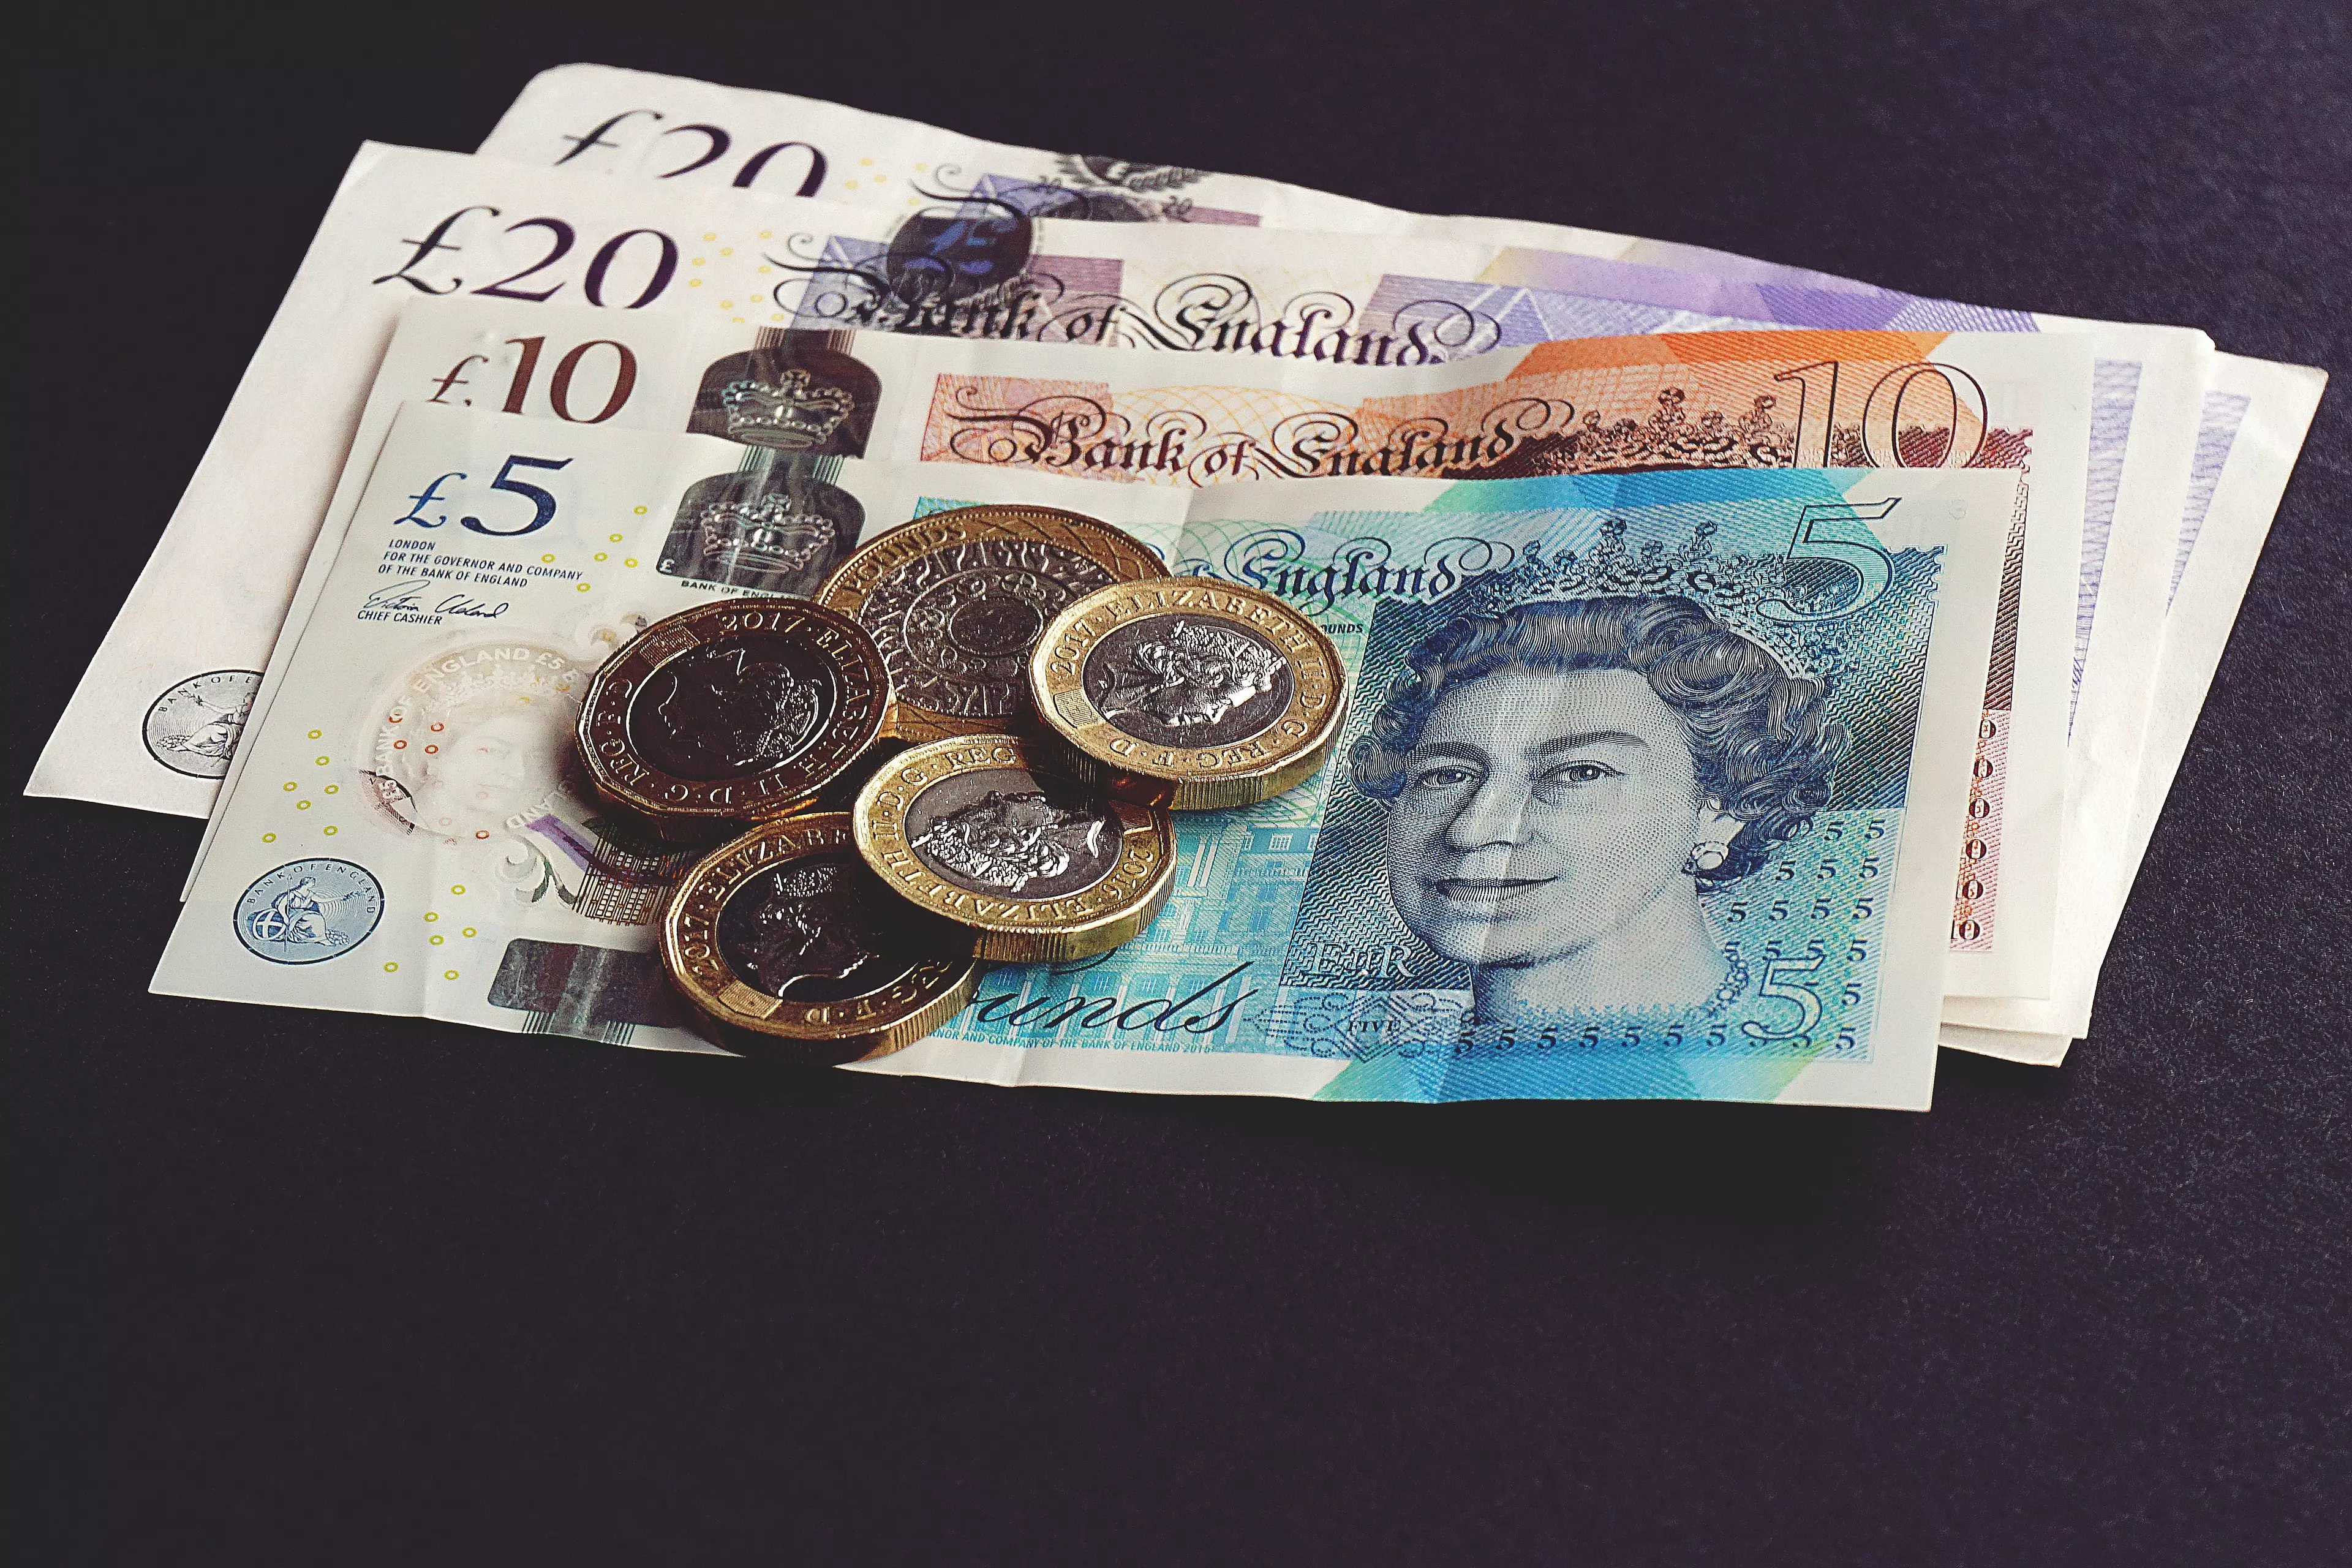 The '1p Challenge' could help you save over £667 (